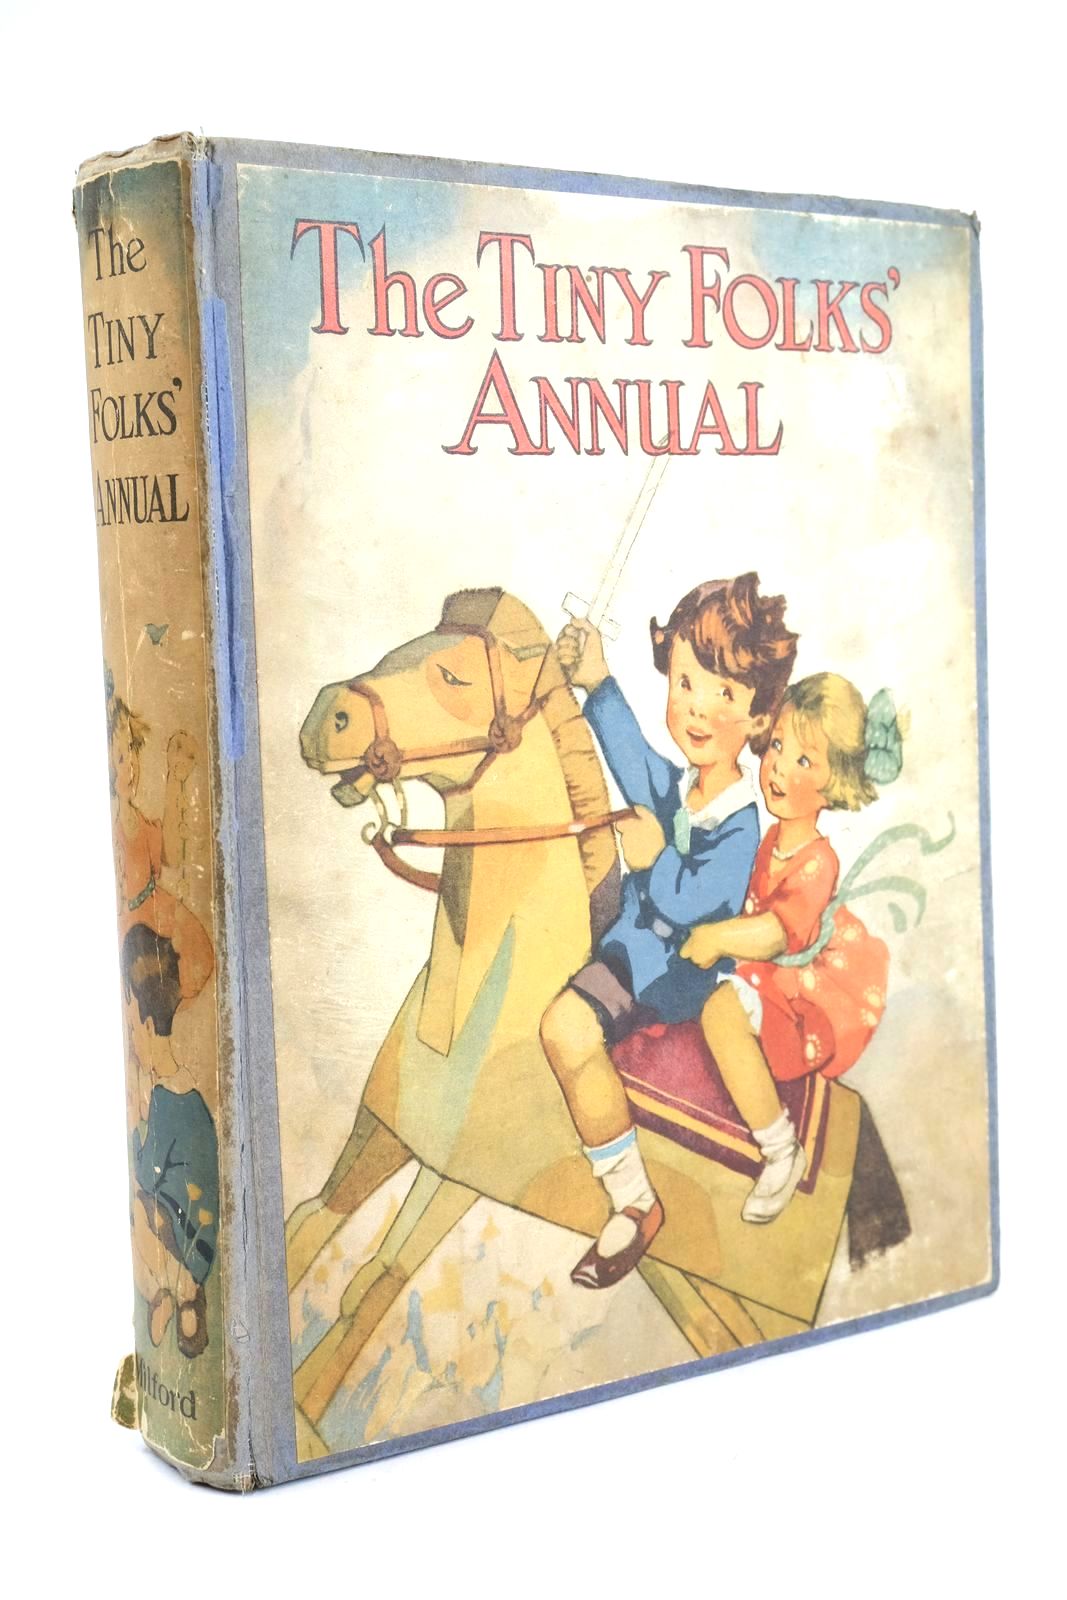 Photo of THE TINY FOLKS' ANNUAL written by Strang, Mrs. Herbert et al, illustrated by Reeve, Mary S. Sowerby, Millicent Govey, Lilian A. Anderson, Anne et al., published by Humphrey Milford, Oxford University Press (STOCK CODE: 1324838)  for sale by Stella & Rose's Books